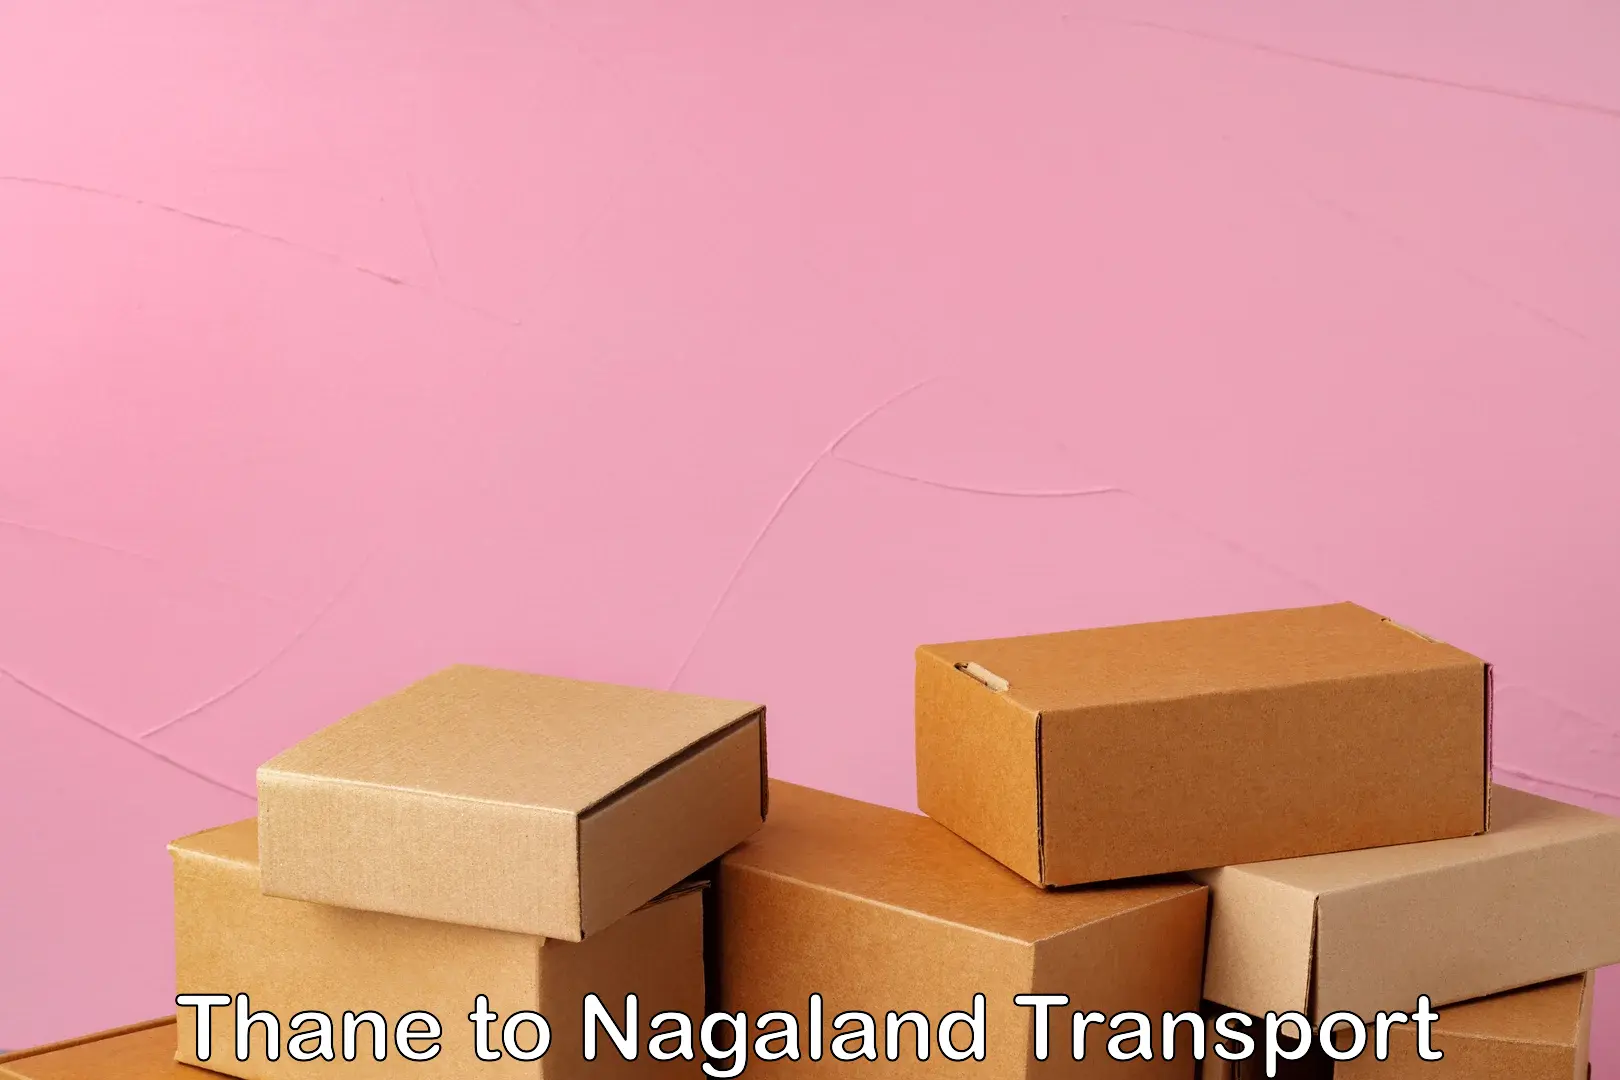 Container transport service Thane to Nagaland